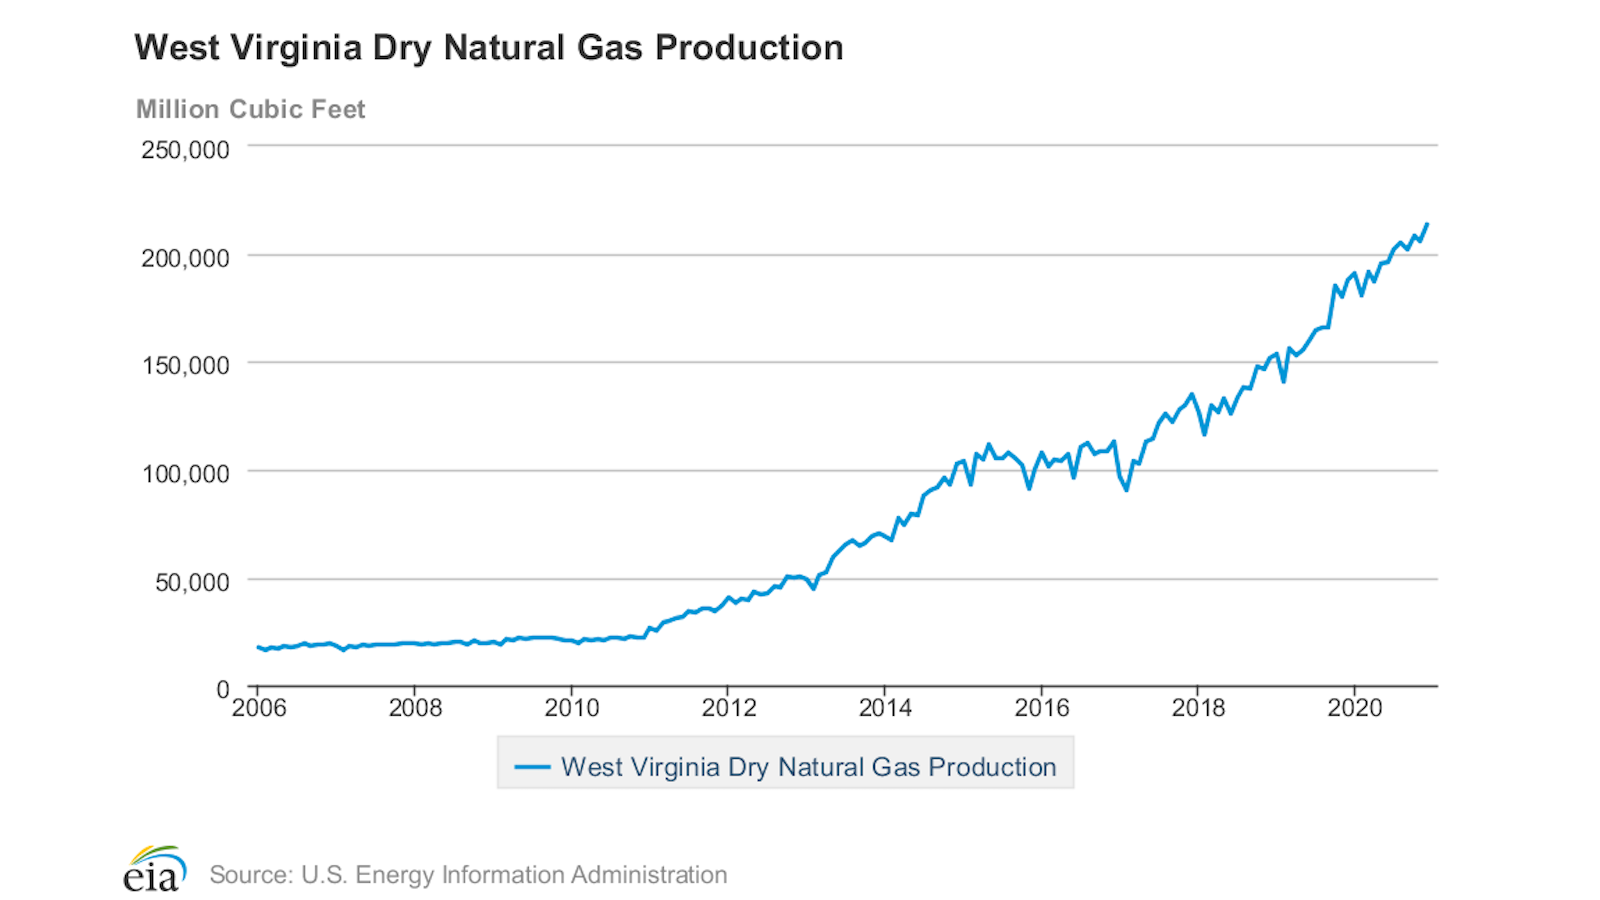 WV natural gas production